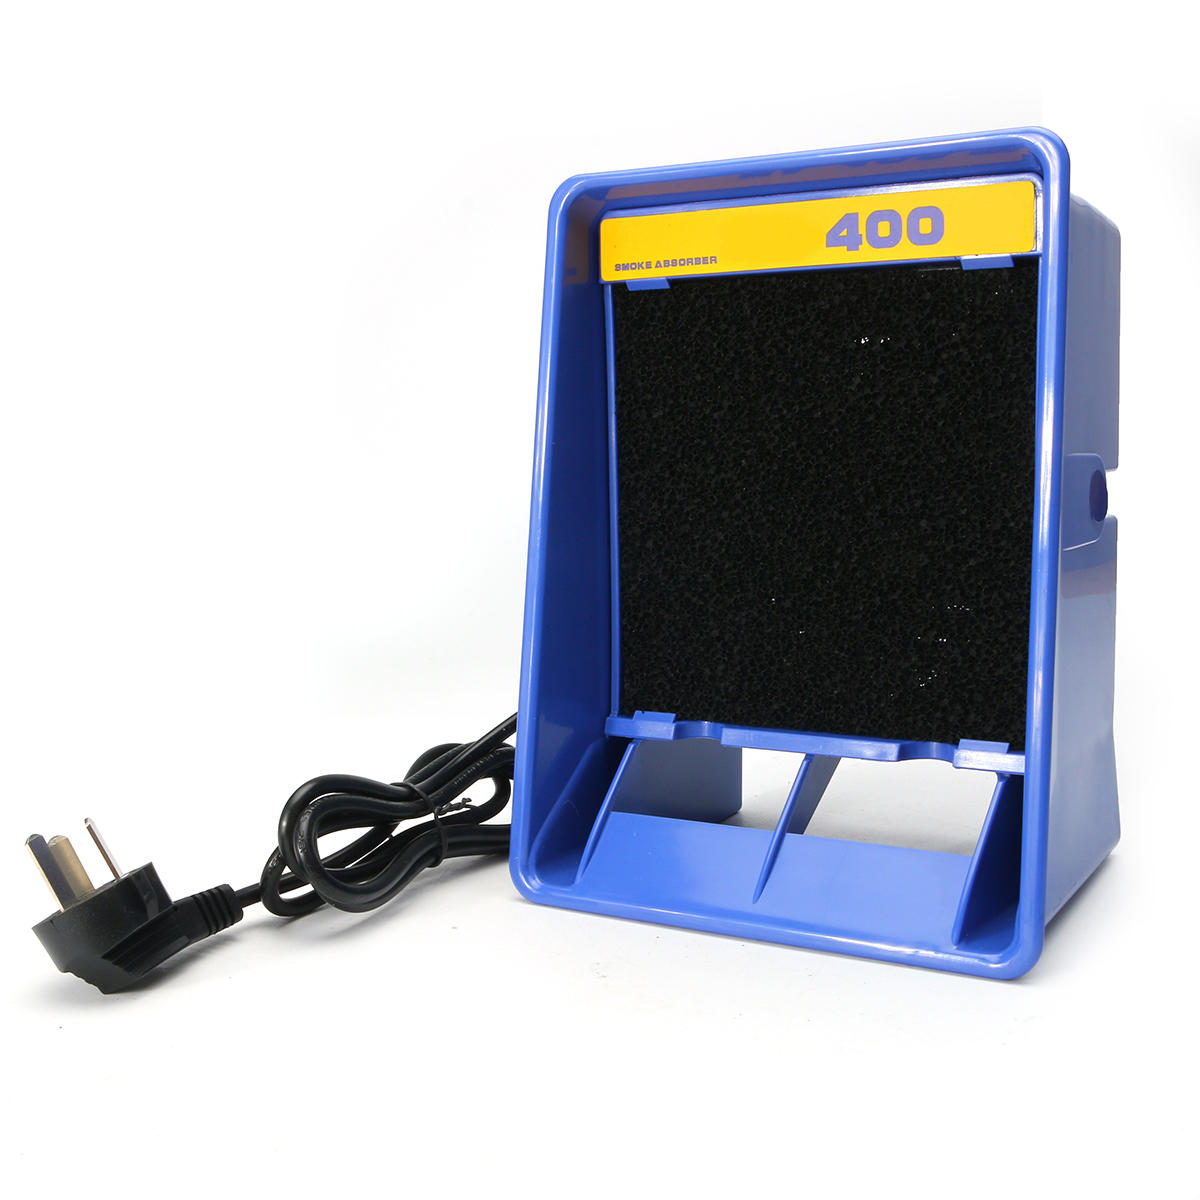 USPS】 Solder Smoke Absorber Remover Fume Extractor Air Filter Fan For Soldering 